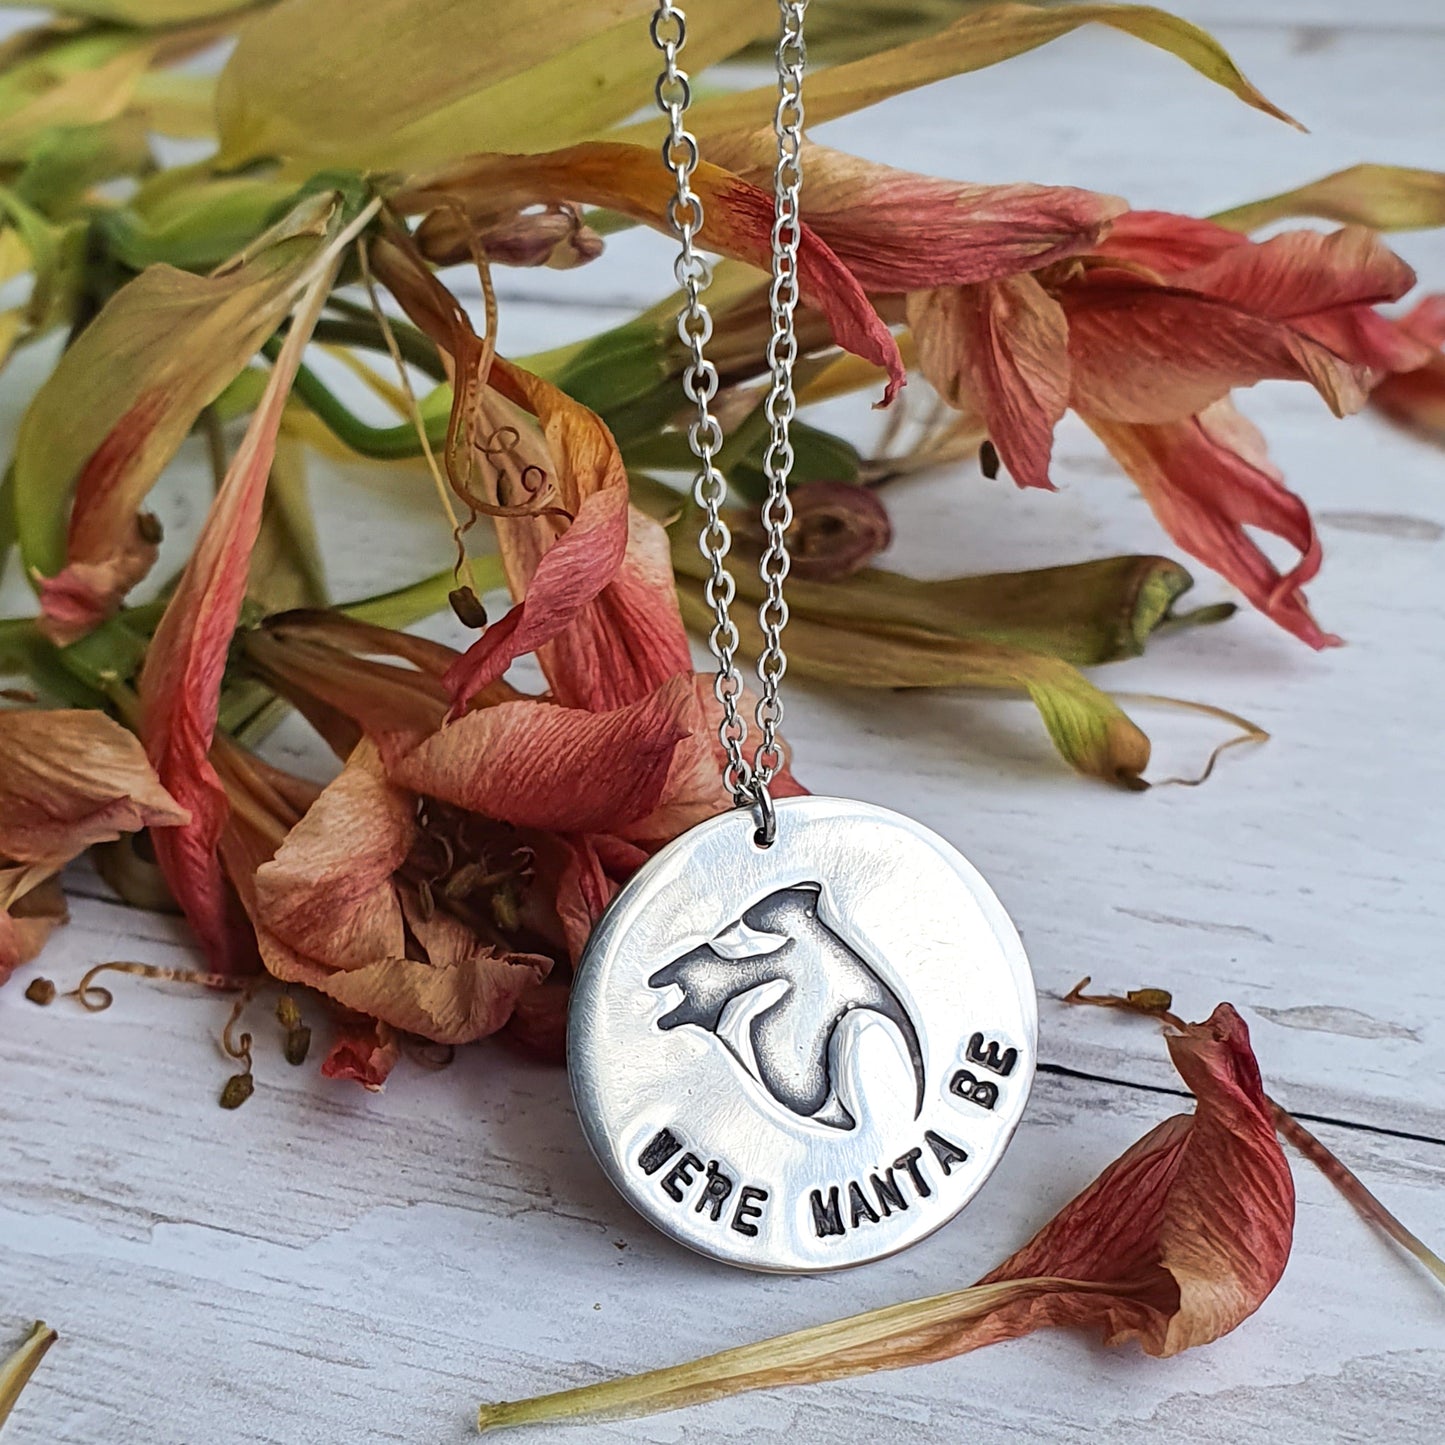 We're Manta Be | Cute silver Manta Ray pendant with romantic message